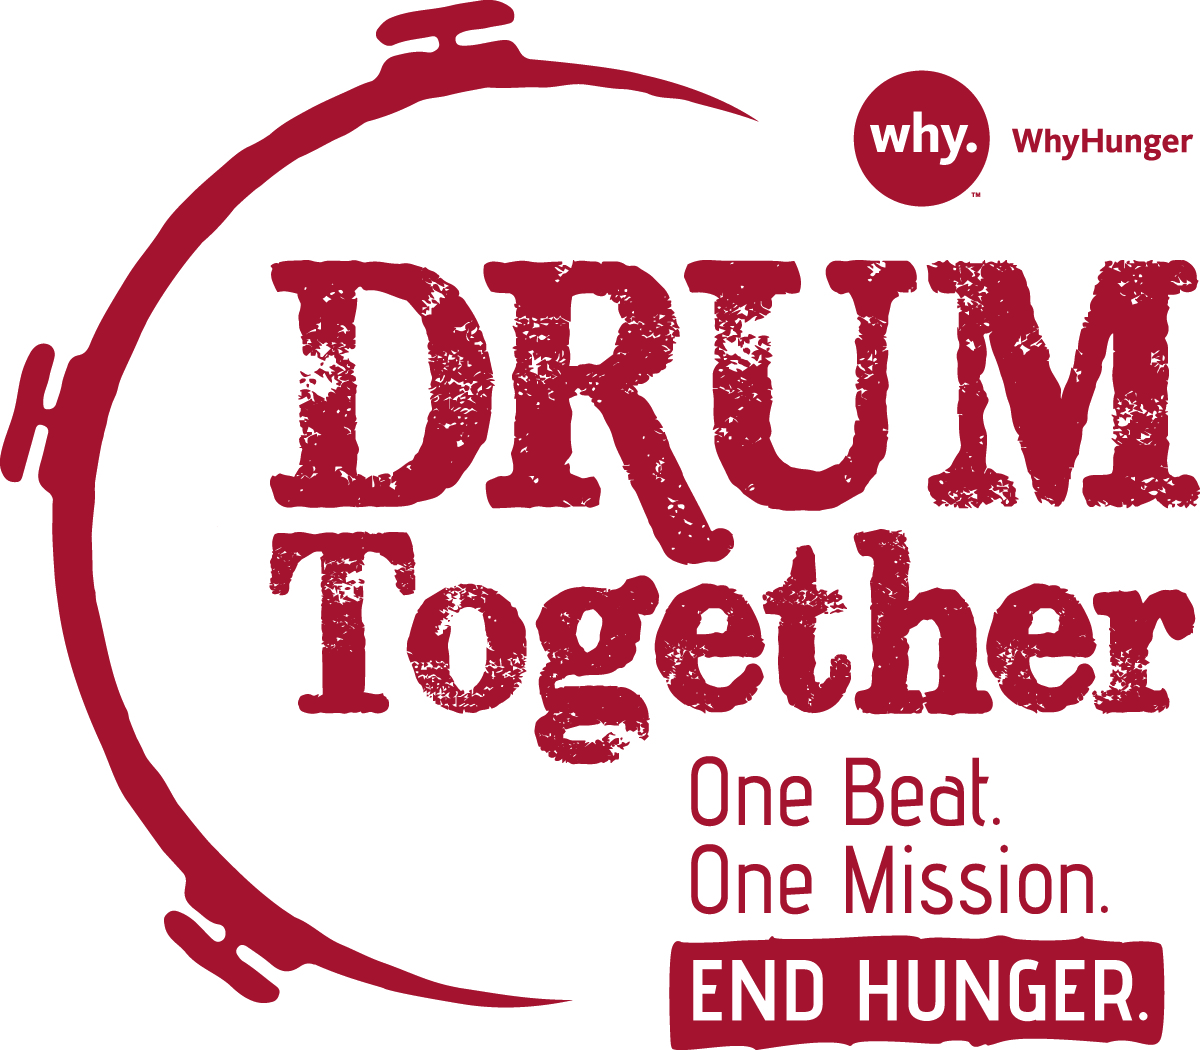 Come Together, Right Now: Ringo Starr, Max Weinberg, Matt Cameron, Jim Keltner, Steve Gadd, Cindy Blackman Santana and Nandi Bushell Team Up for WhyHunger Campaign